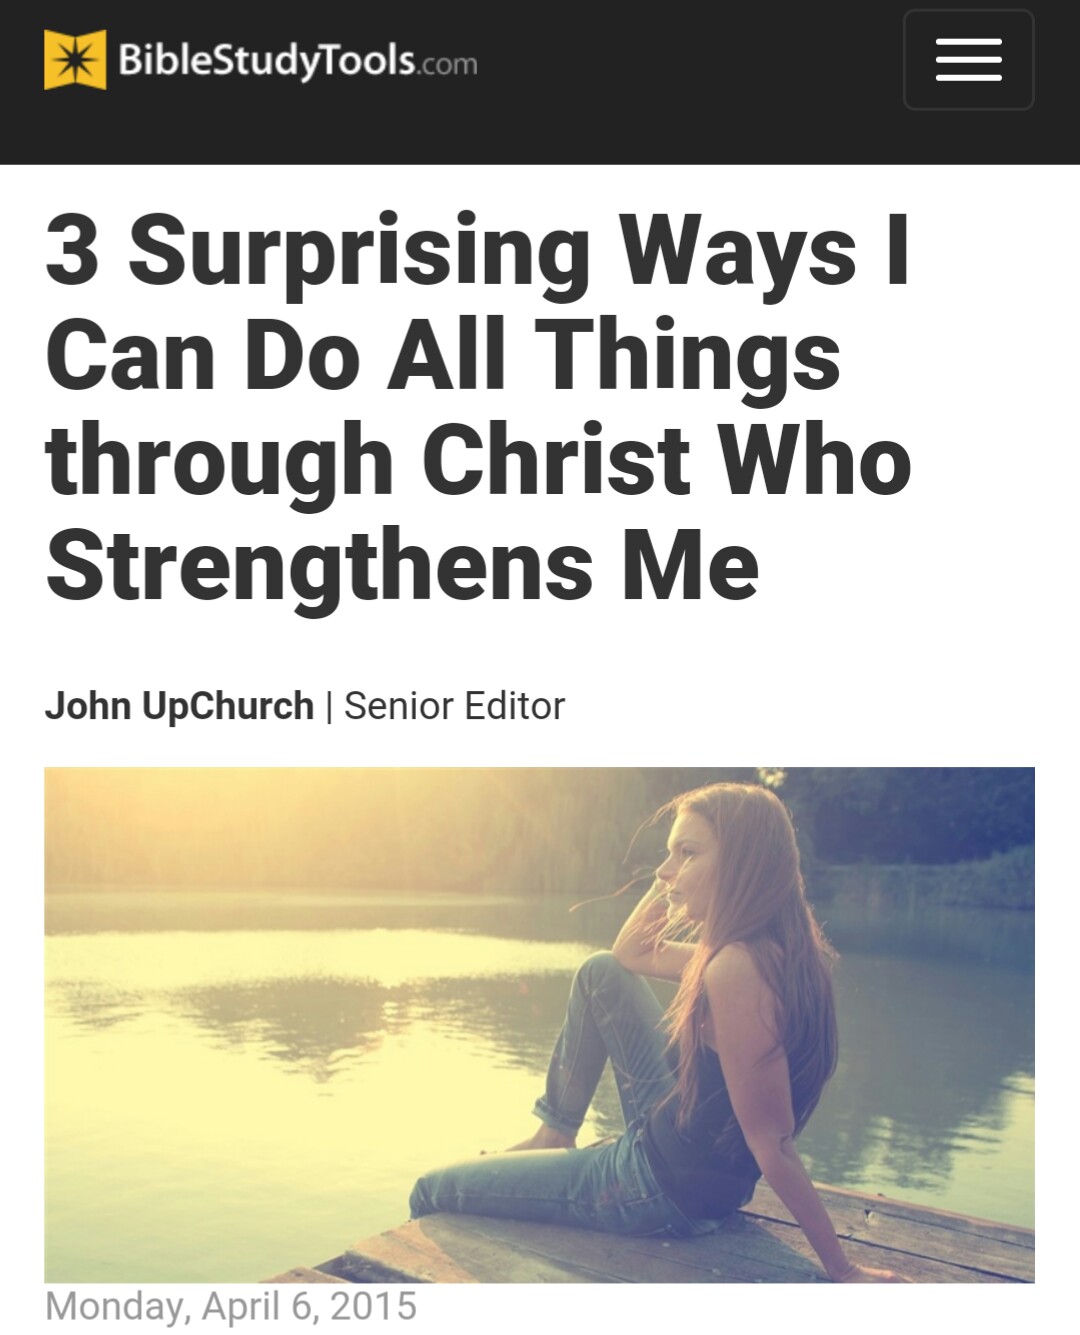 And on the seventh day he created clickbait.